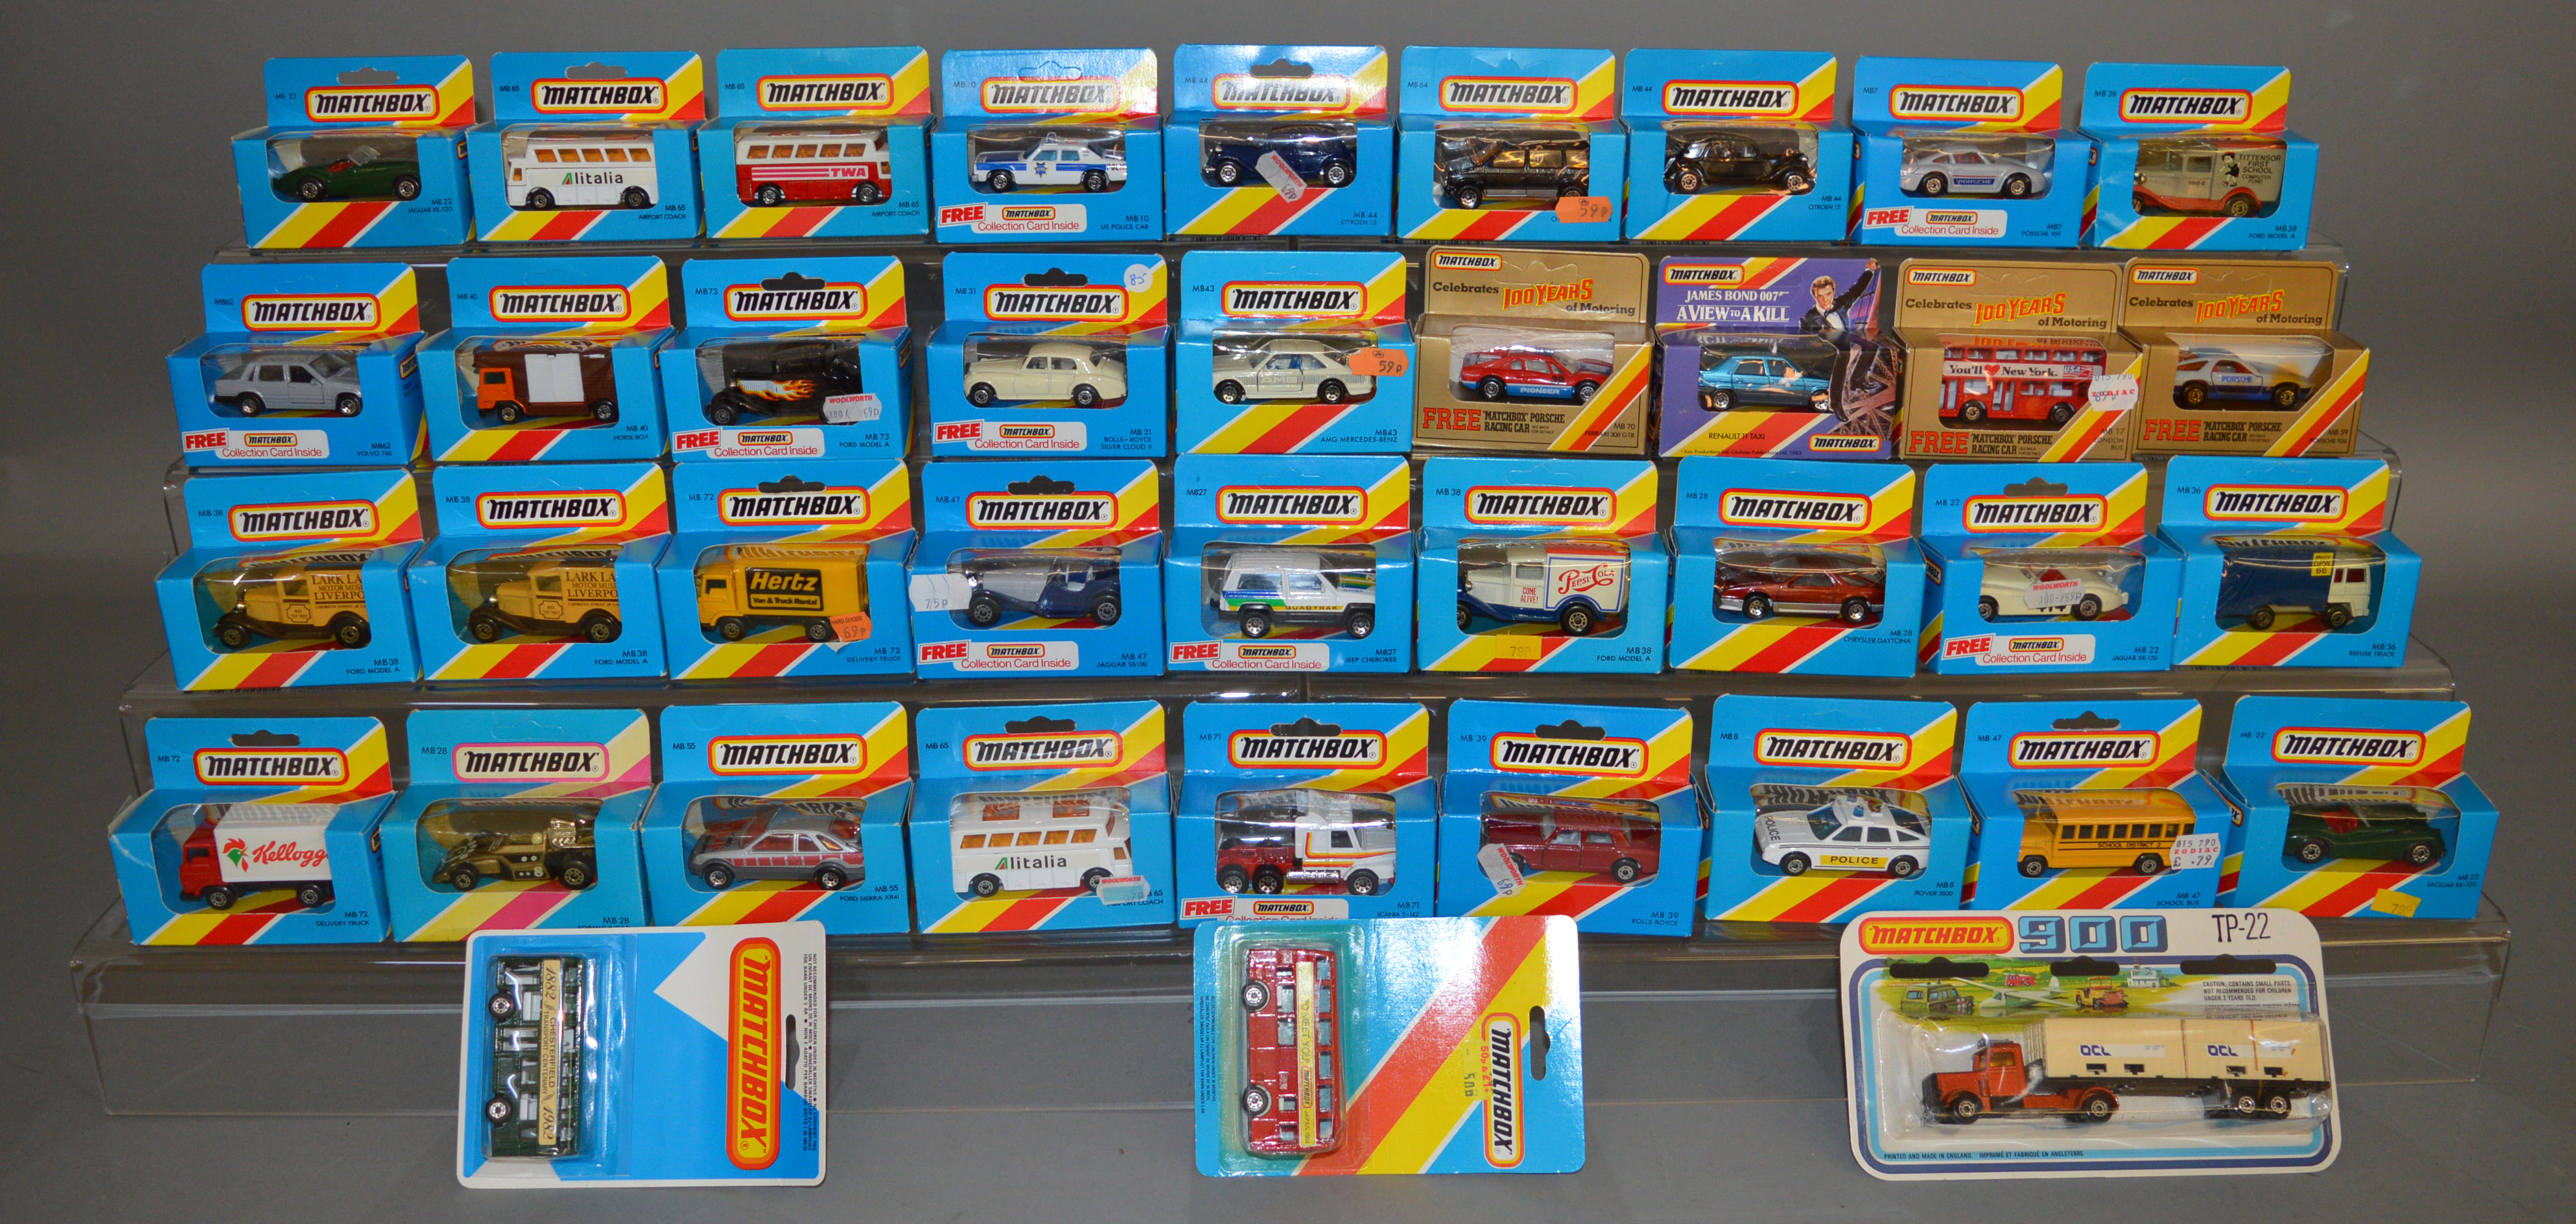 35 boxed Matchbox Superfast models, mostly in blue window box packaging with red and yellow